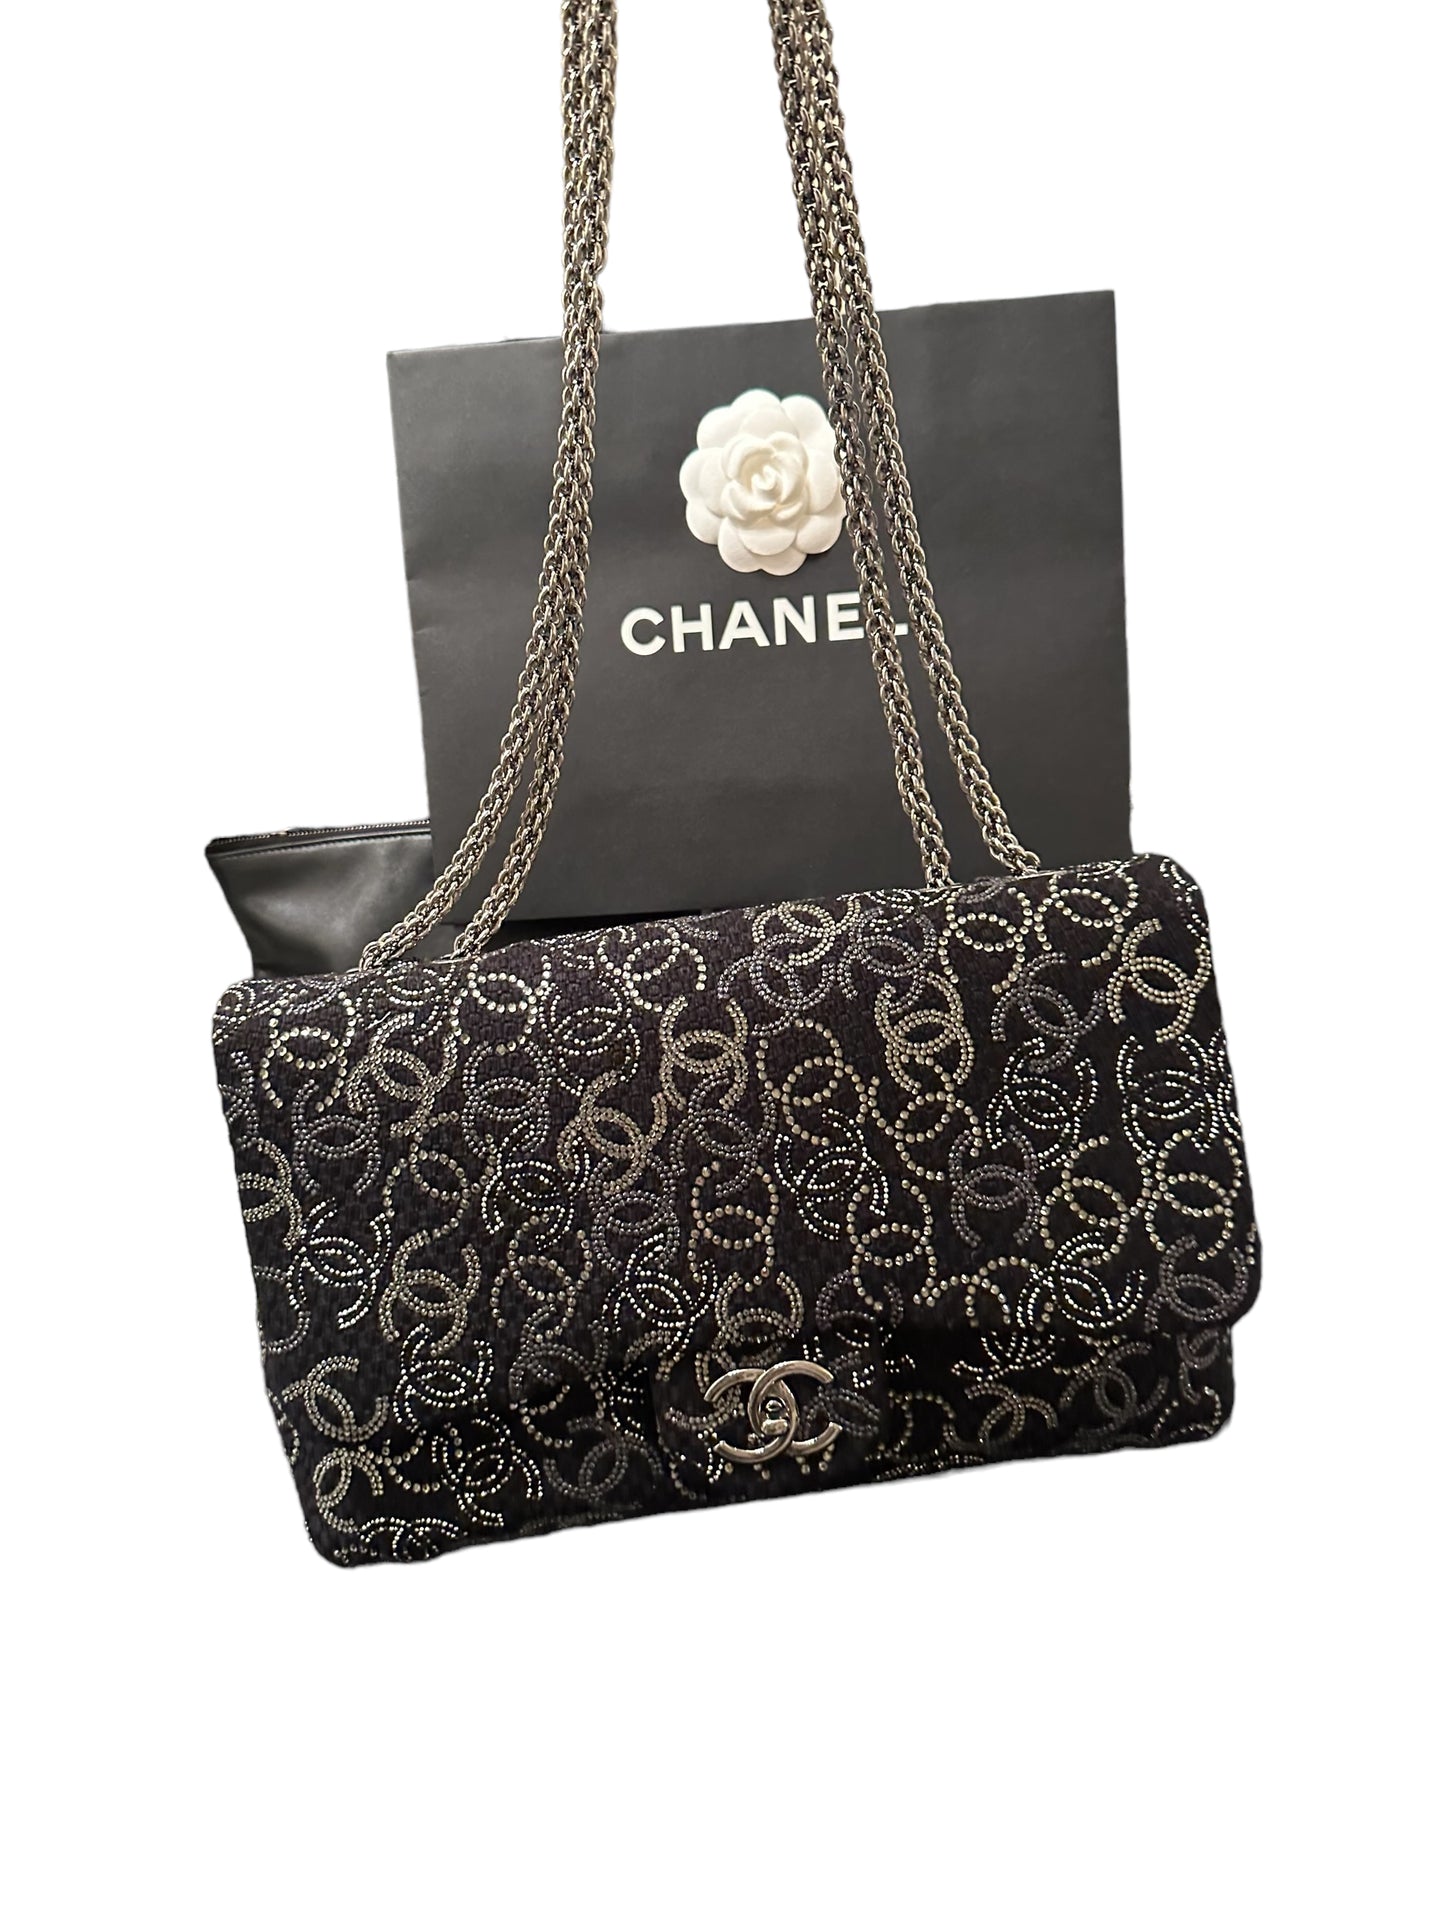 Sold at Auction: Chanel Wool Tweed and Swarovski Crystal Flap Bag